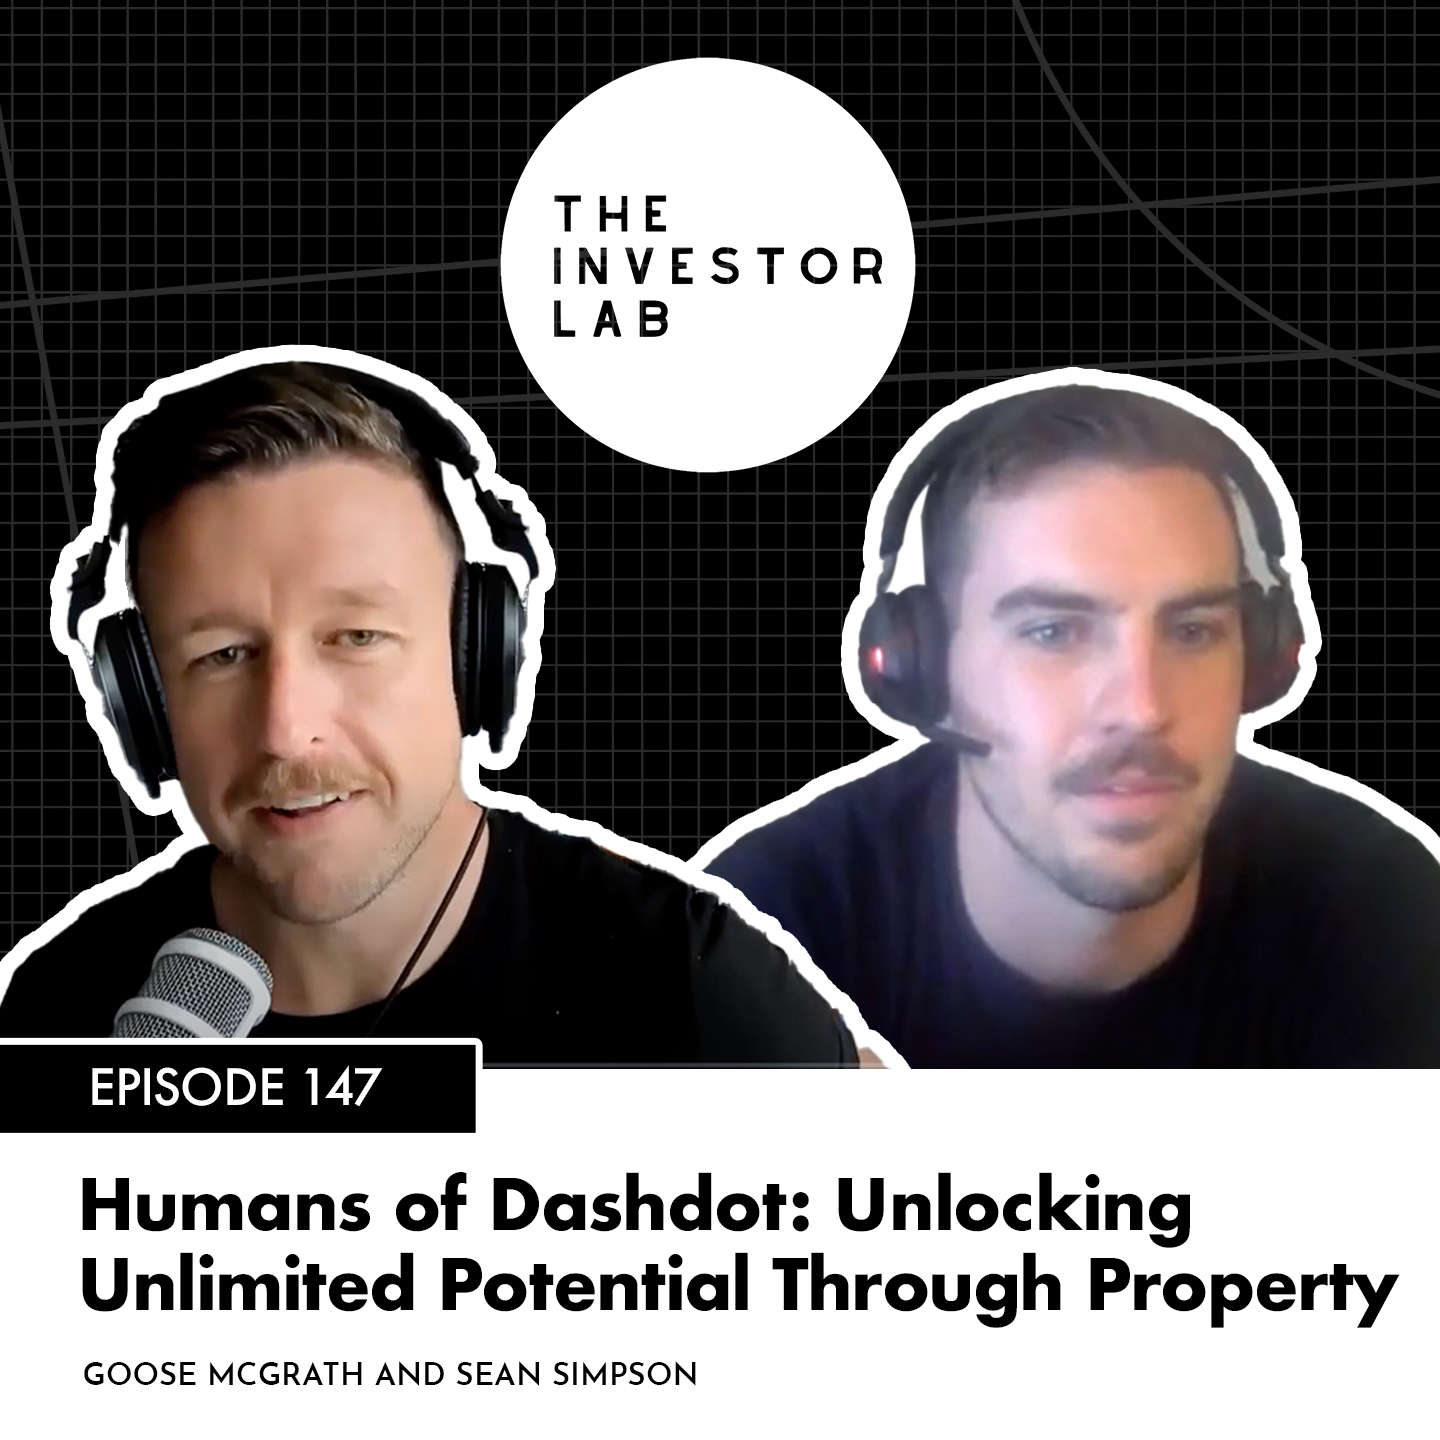 Humans of Dashdot: Unlocking Unlimited Potential Through Property with Sean Simpson